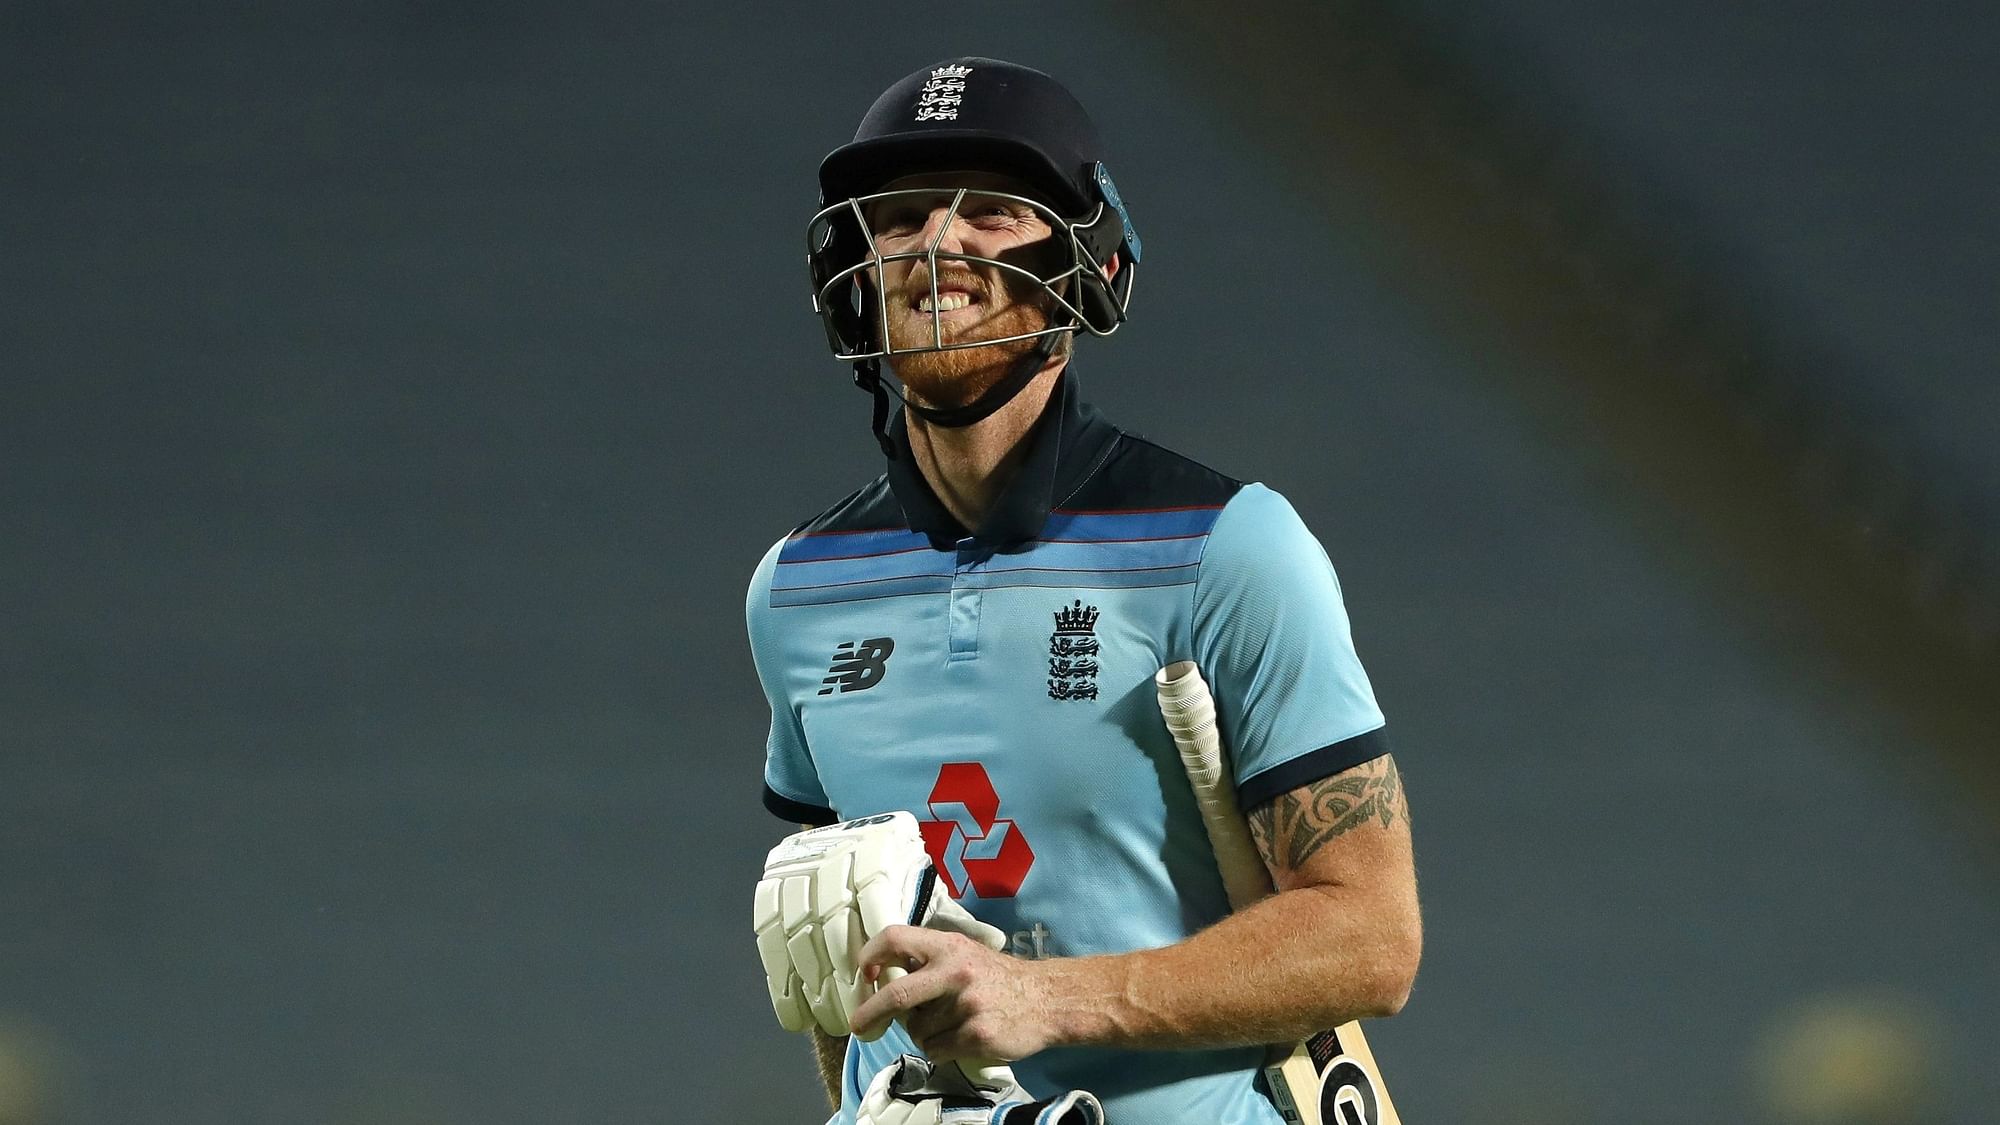 <div class="paragraphs"><p>England all-rounder Ben Stokes is set to retire from ODI cricket following Tuesday's match against South Africa.&nbsp;</p></div>